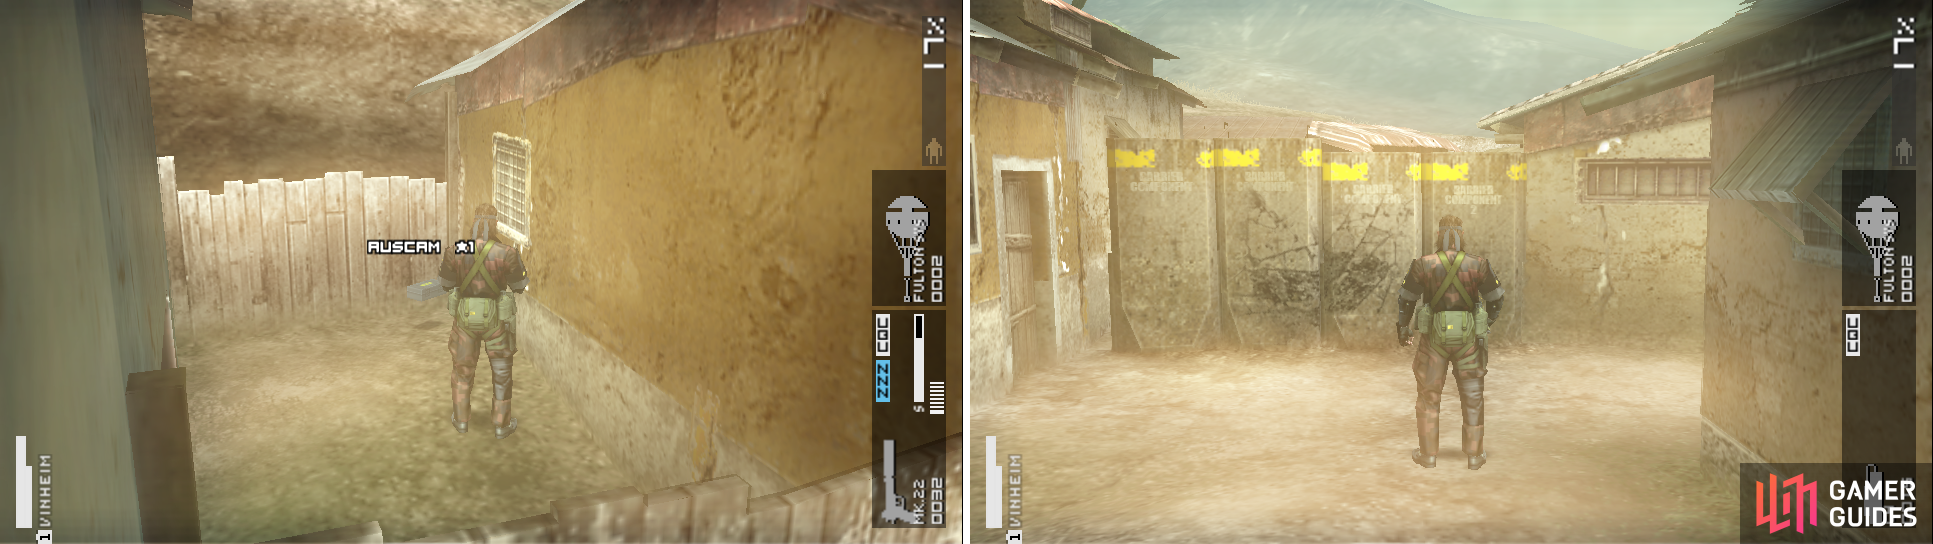 The Desert Auscam camo’s location (left picture). Time to C4 the wall to rubble (right picture).